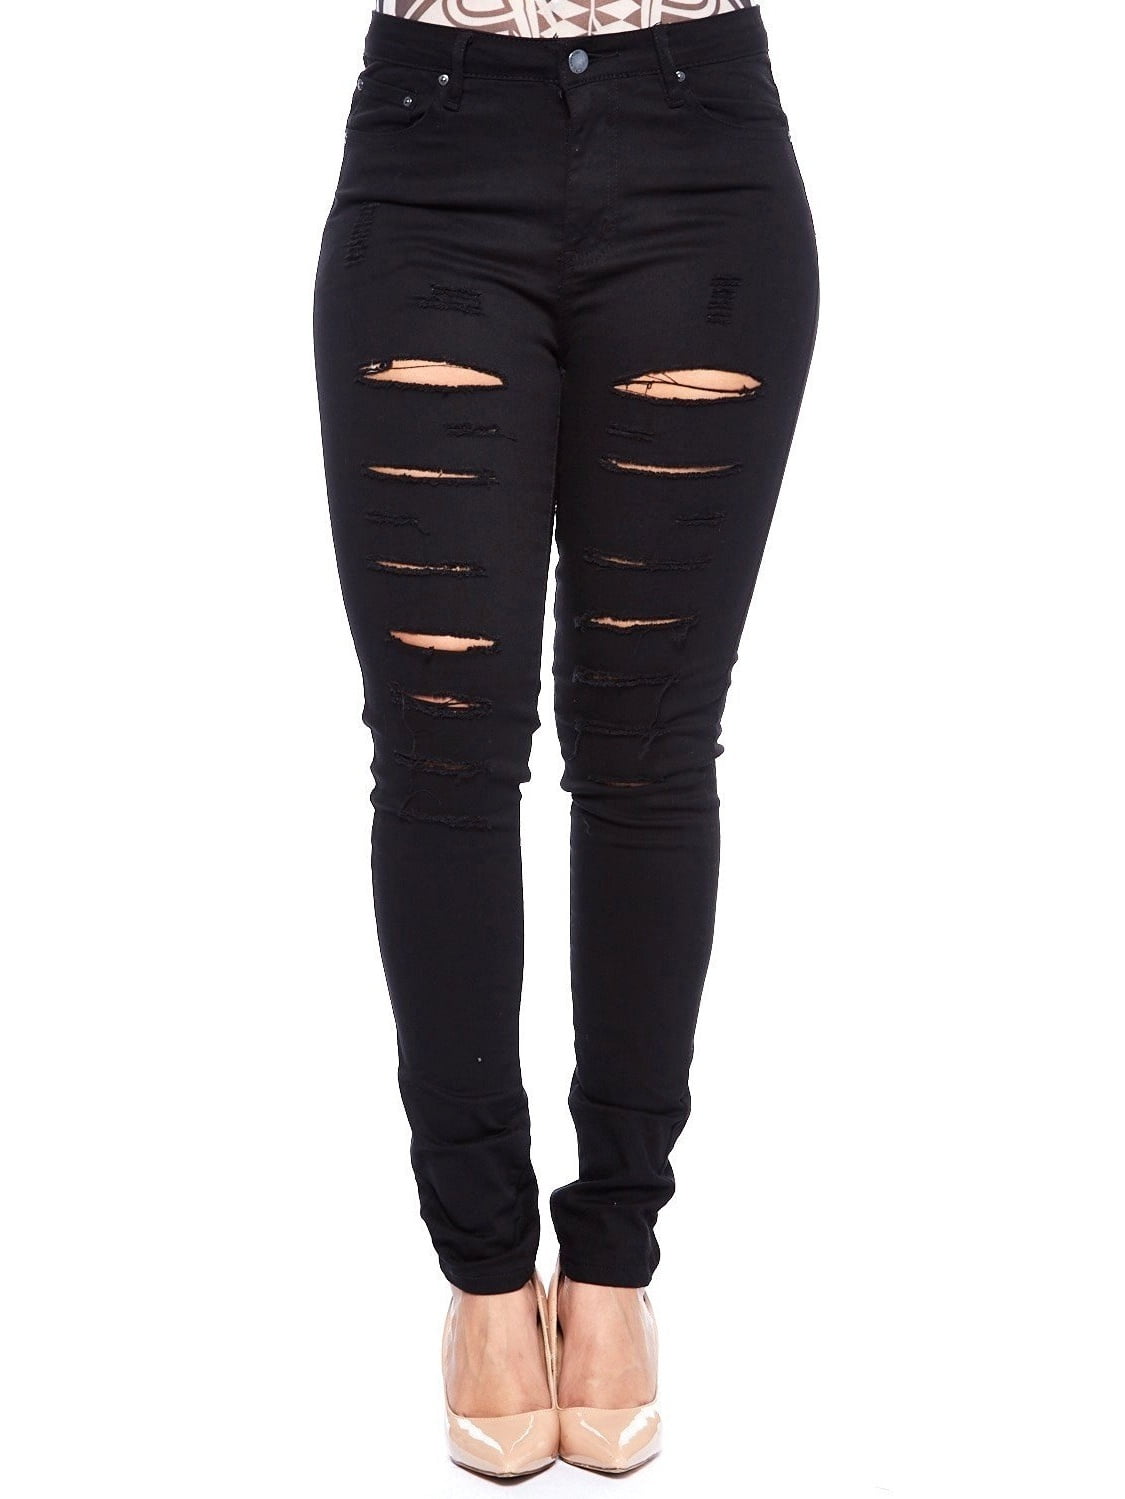 black ripped skinny jeans size 16